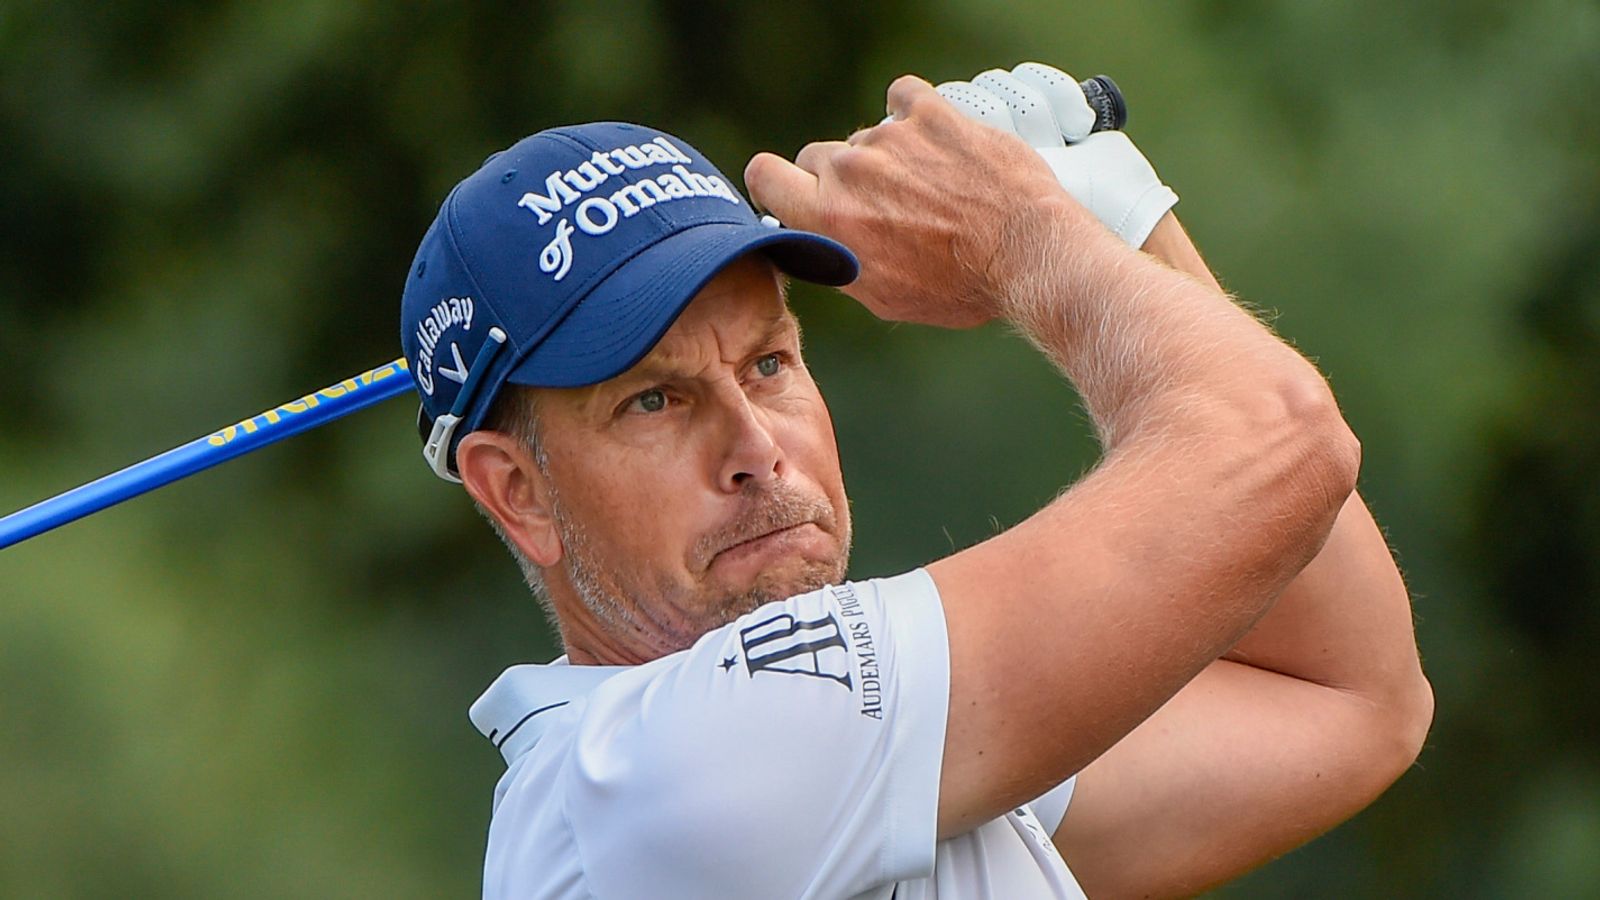 Henrik Stenson confirms LIV switch but hopes to represent Team Europe at future Ryder Cups